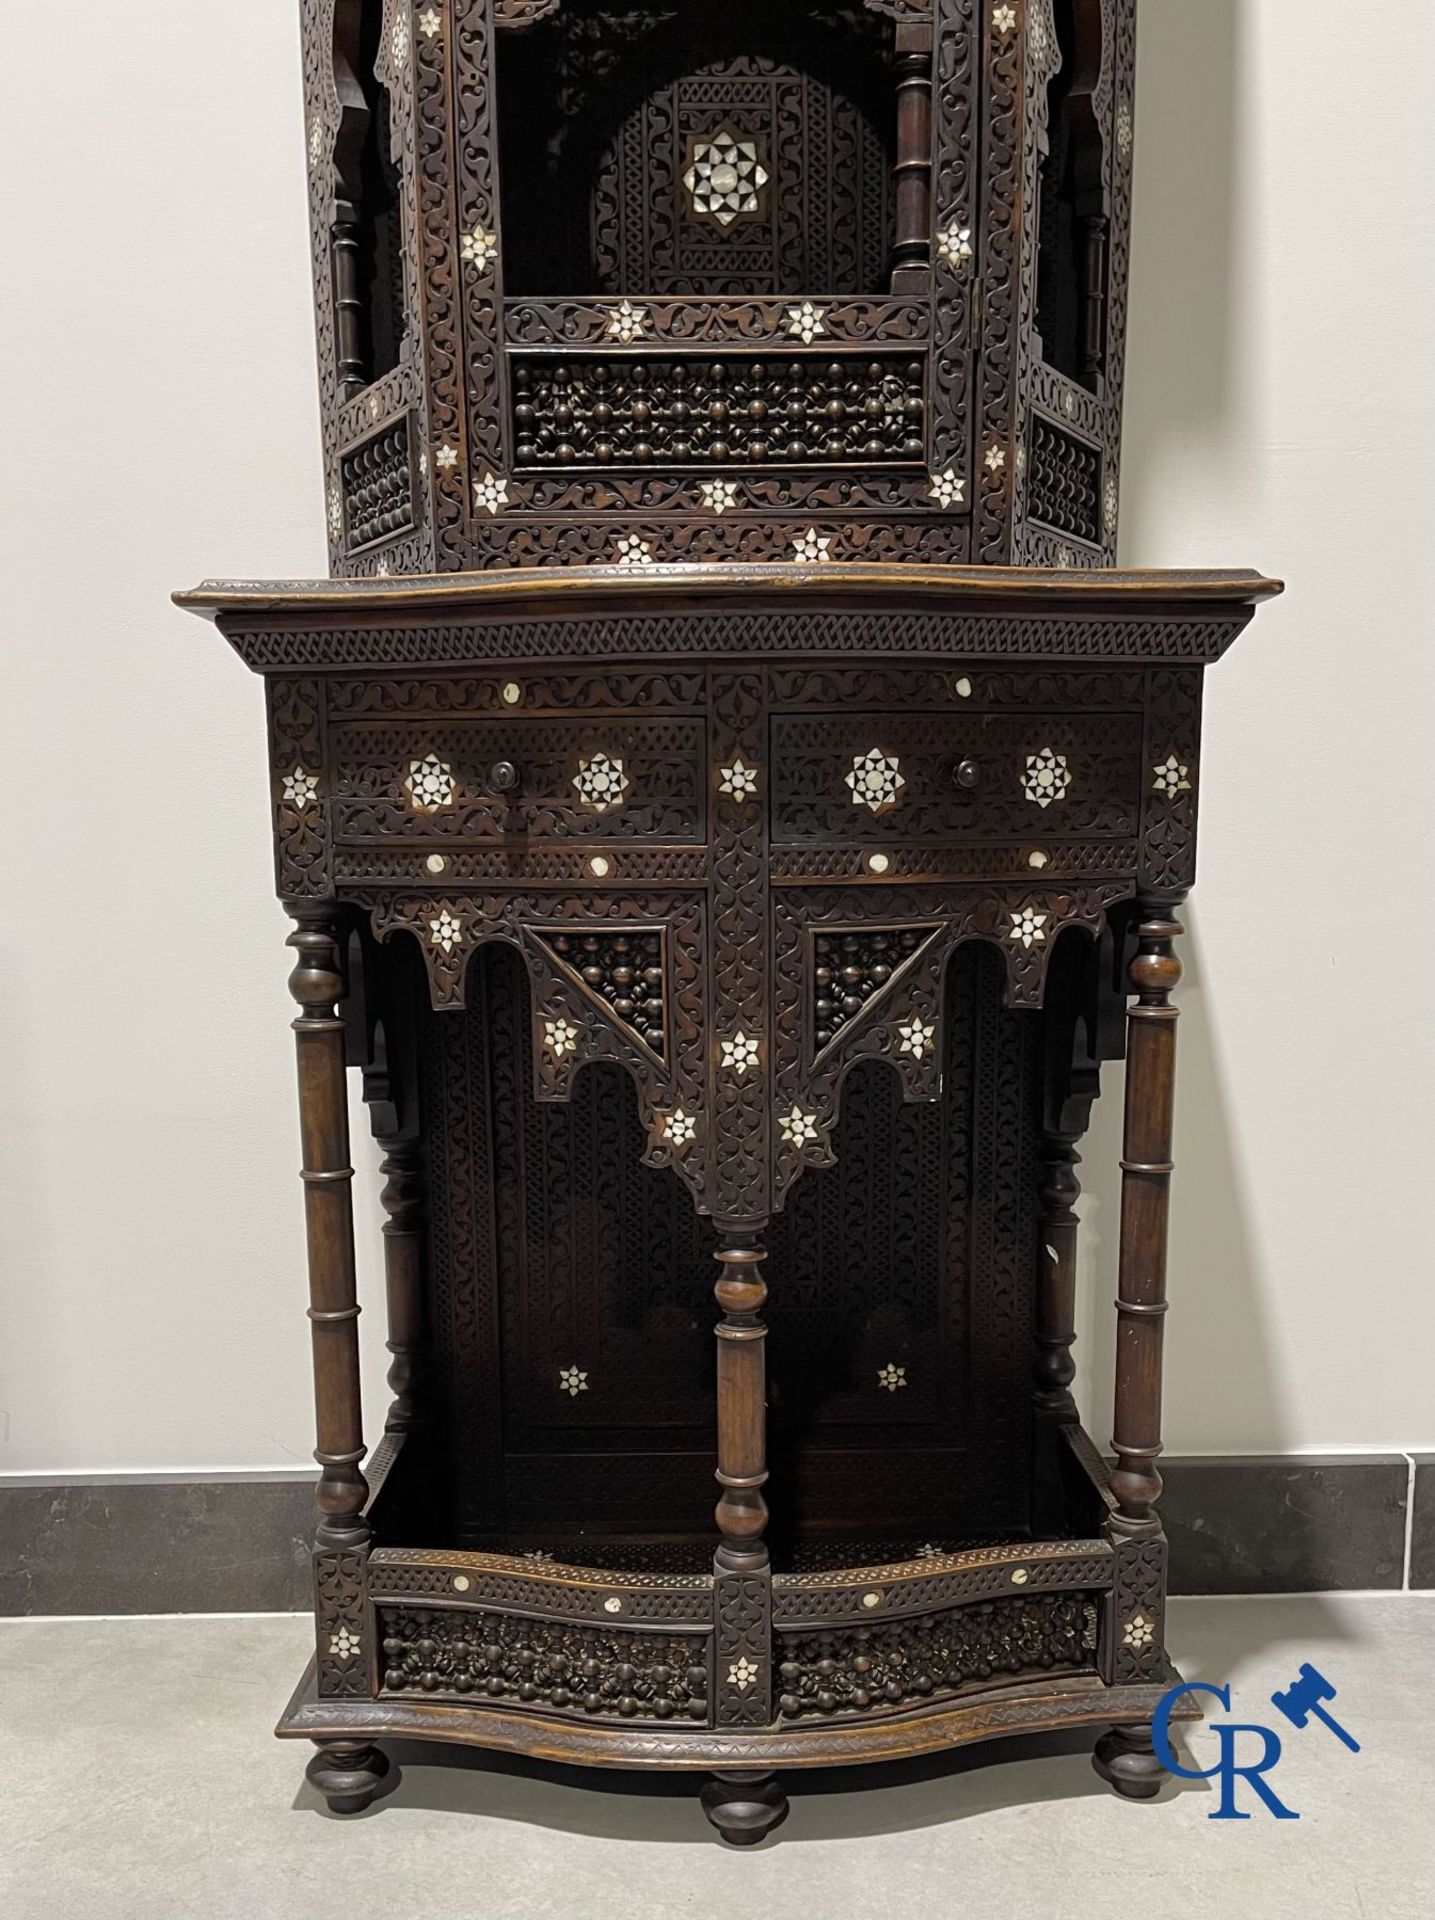 Sculpted furniture with inlays of ebony and mother-of-pearl. Syria, early 19th century. - Image 4 of 22